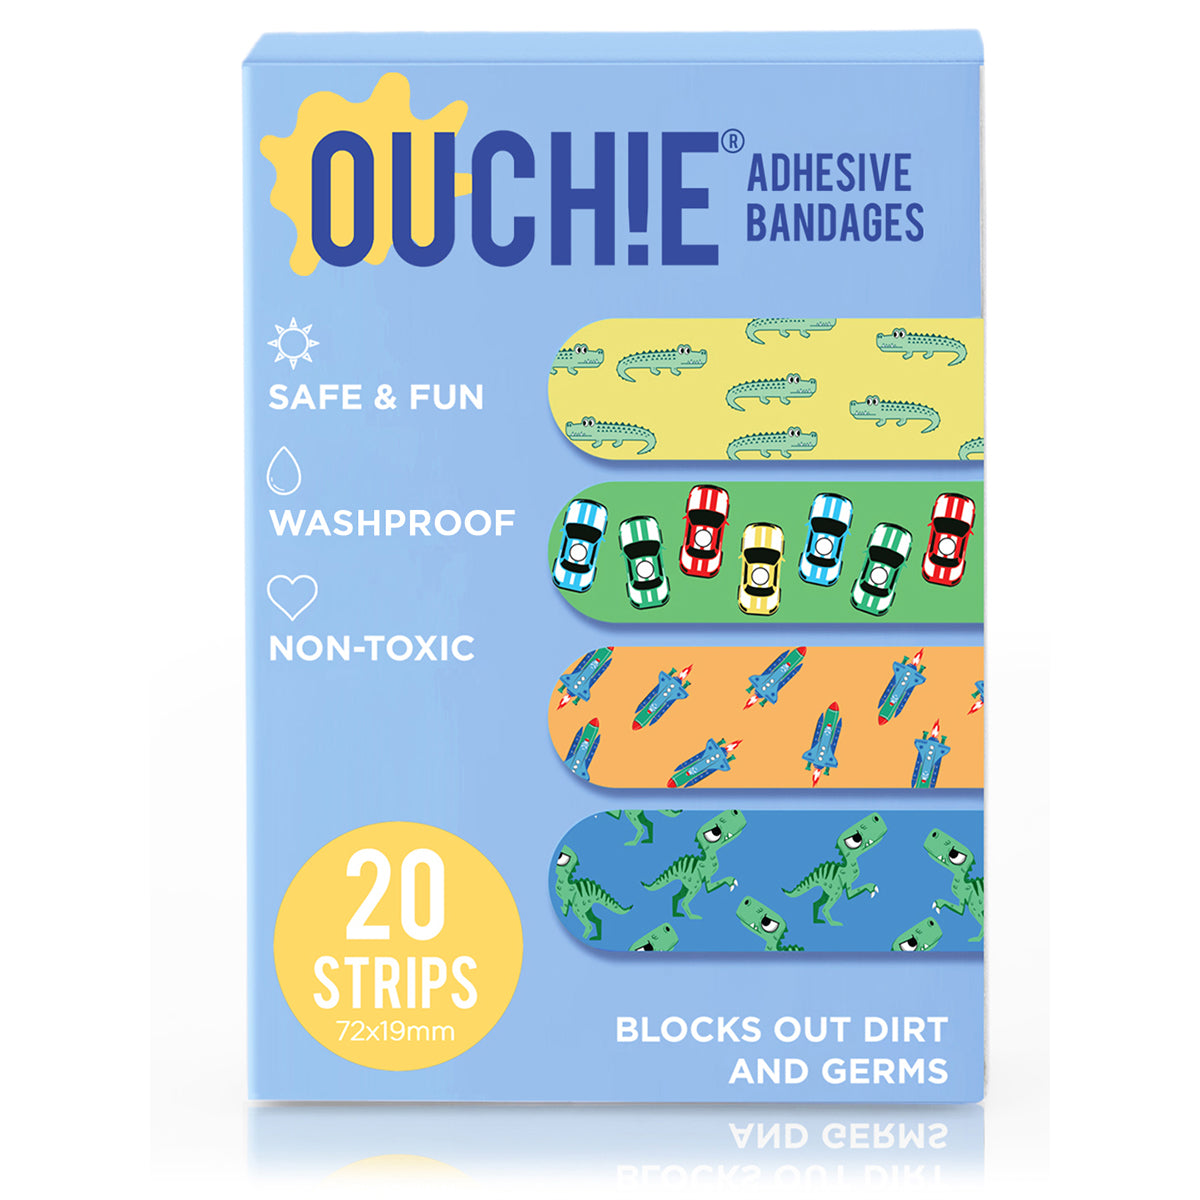 Ouchie Non-Toxic Printed Bandages COMBO Set of 3 (3 x 20= 60 Pack)- (PINK, BLUE & LAVENDER)